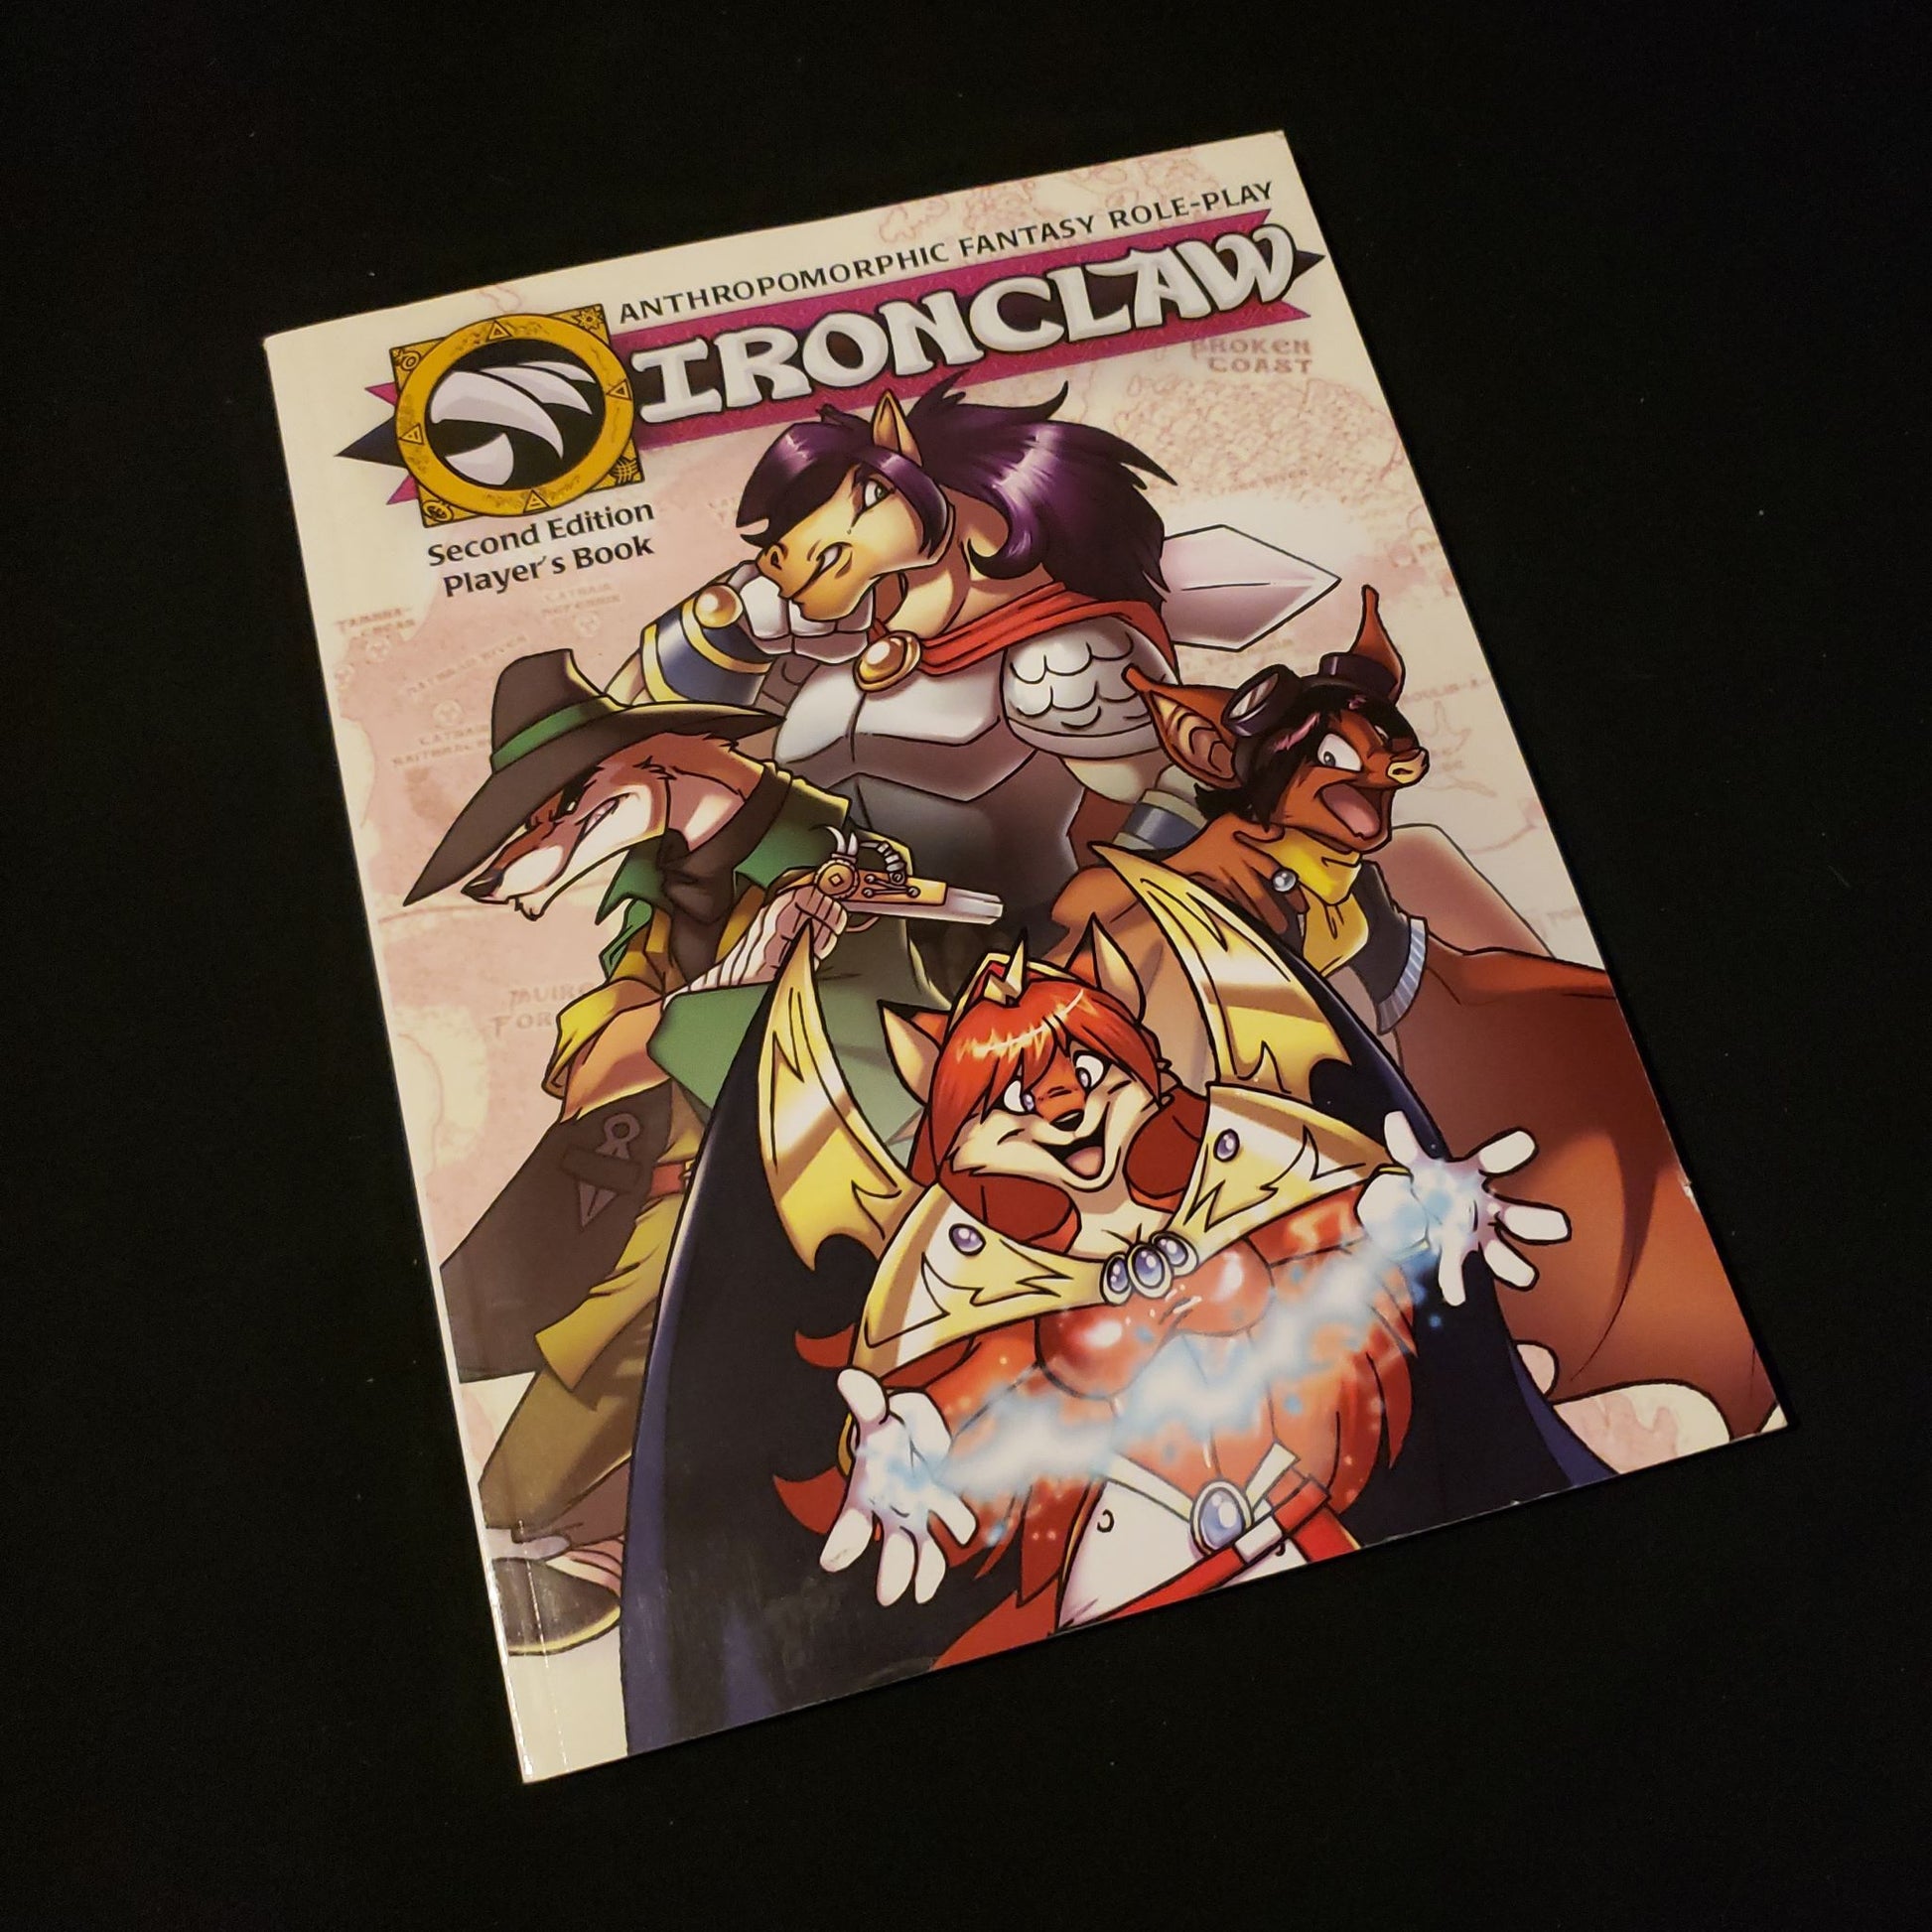 Image shows the front cover of the Second Edition Player's Book for the Ironclaw roleplaying game